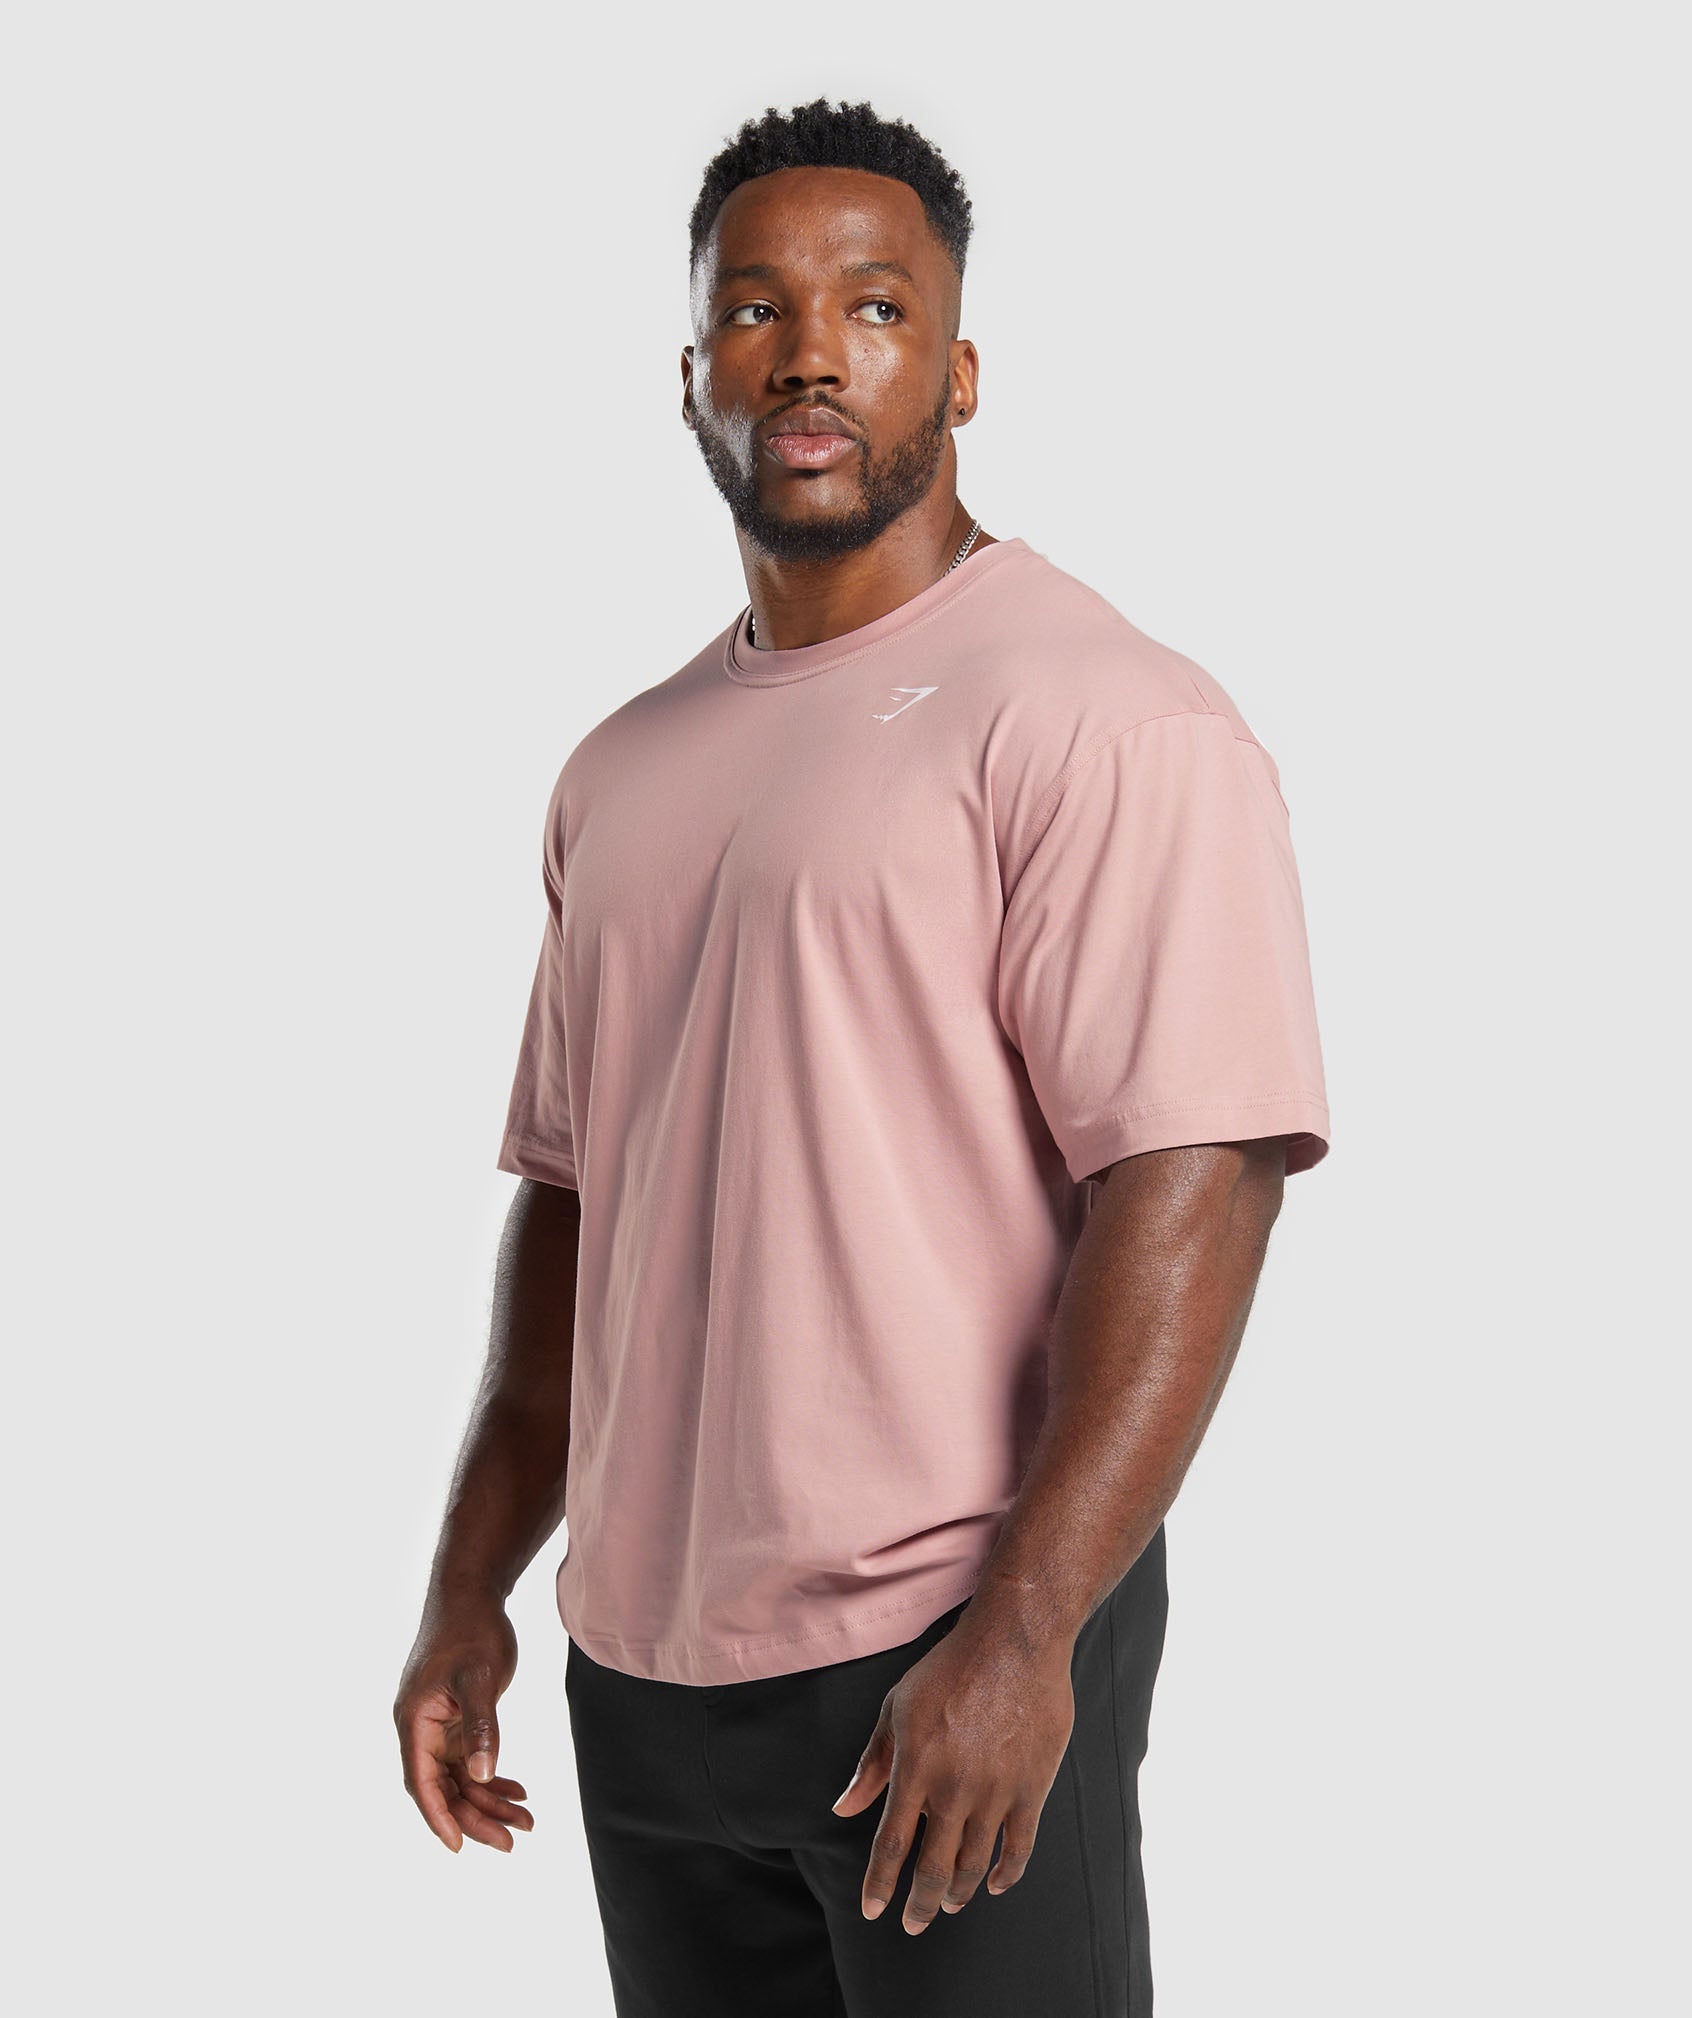 Power T-Shirt in Light Pink - view 3